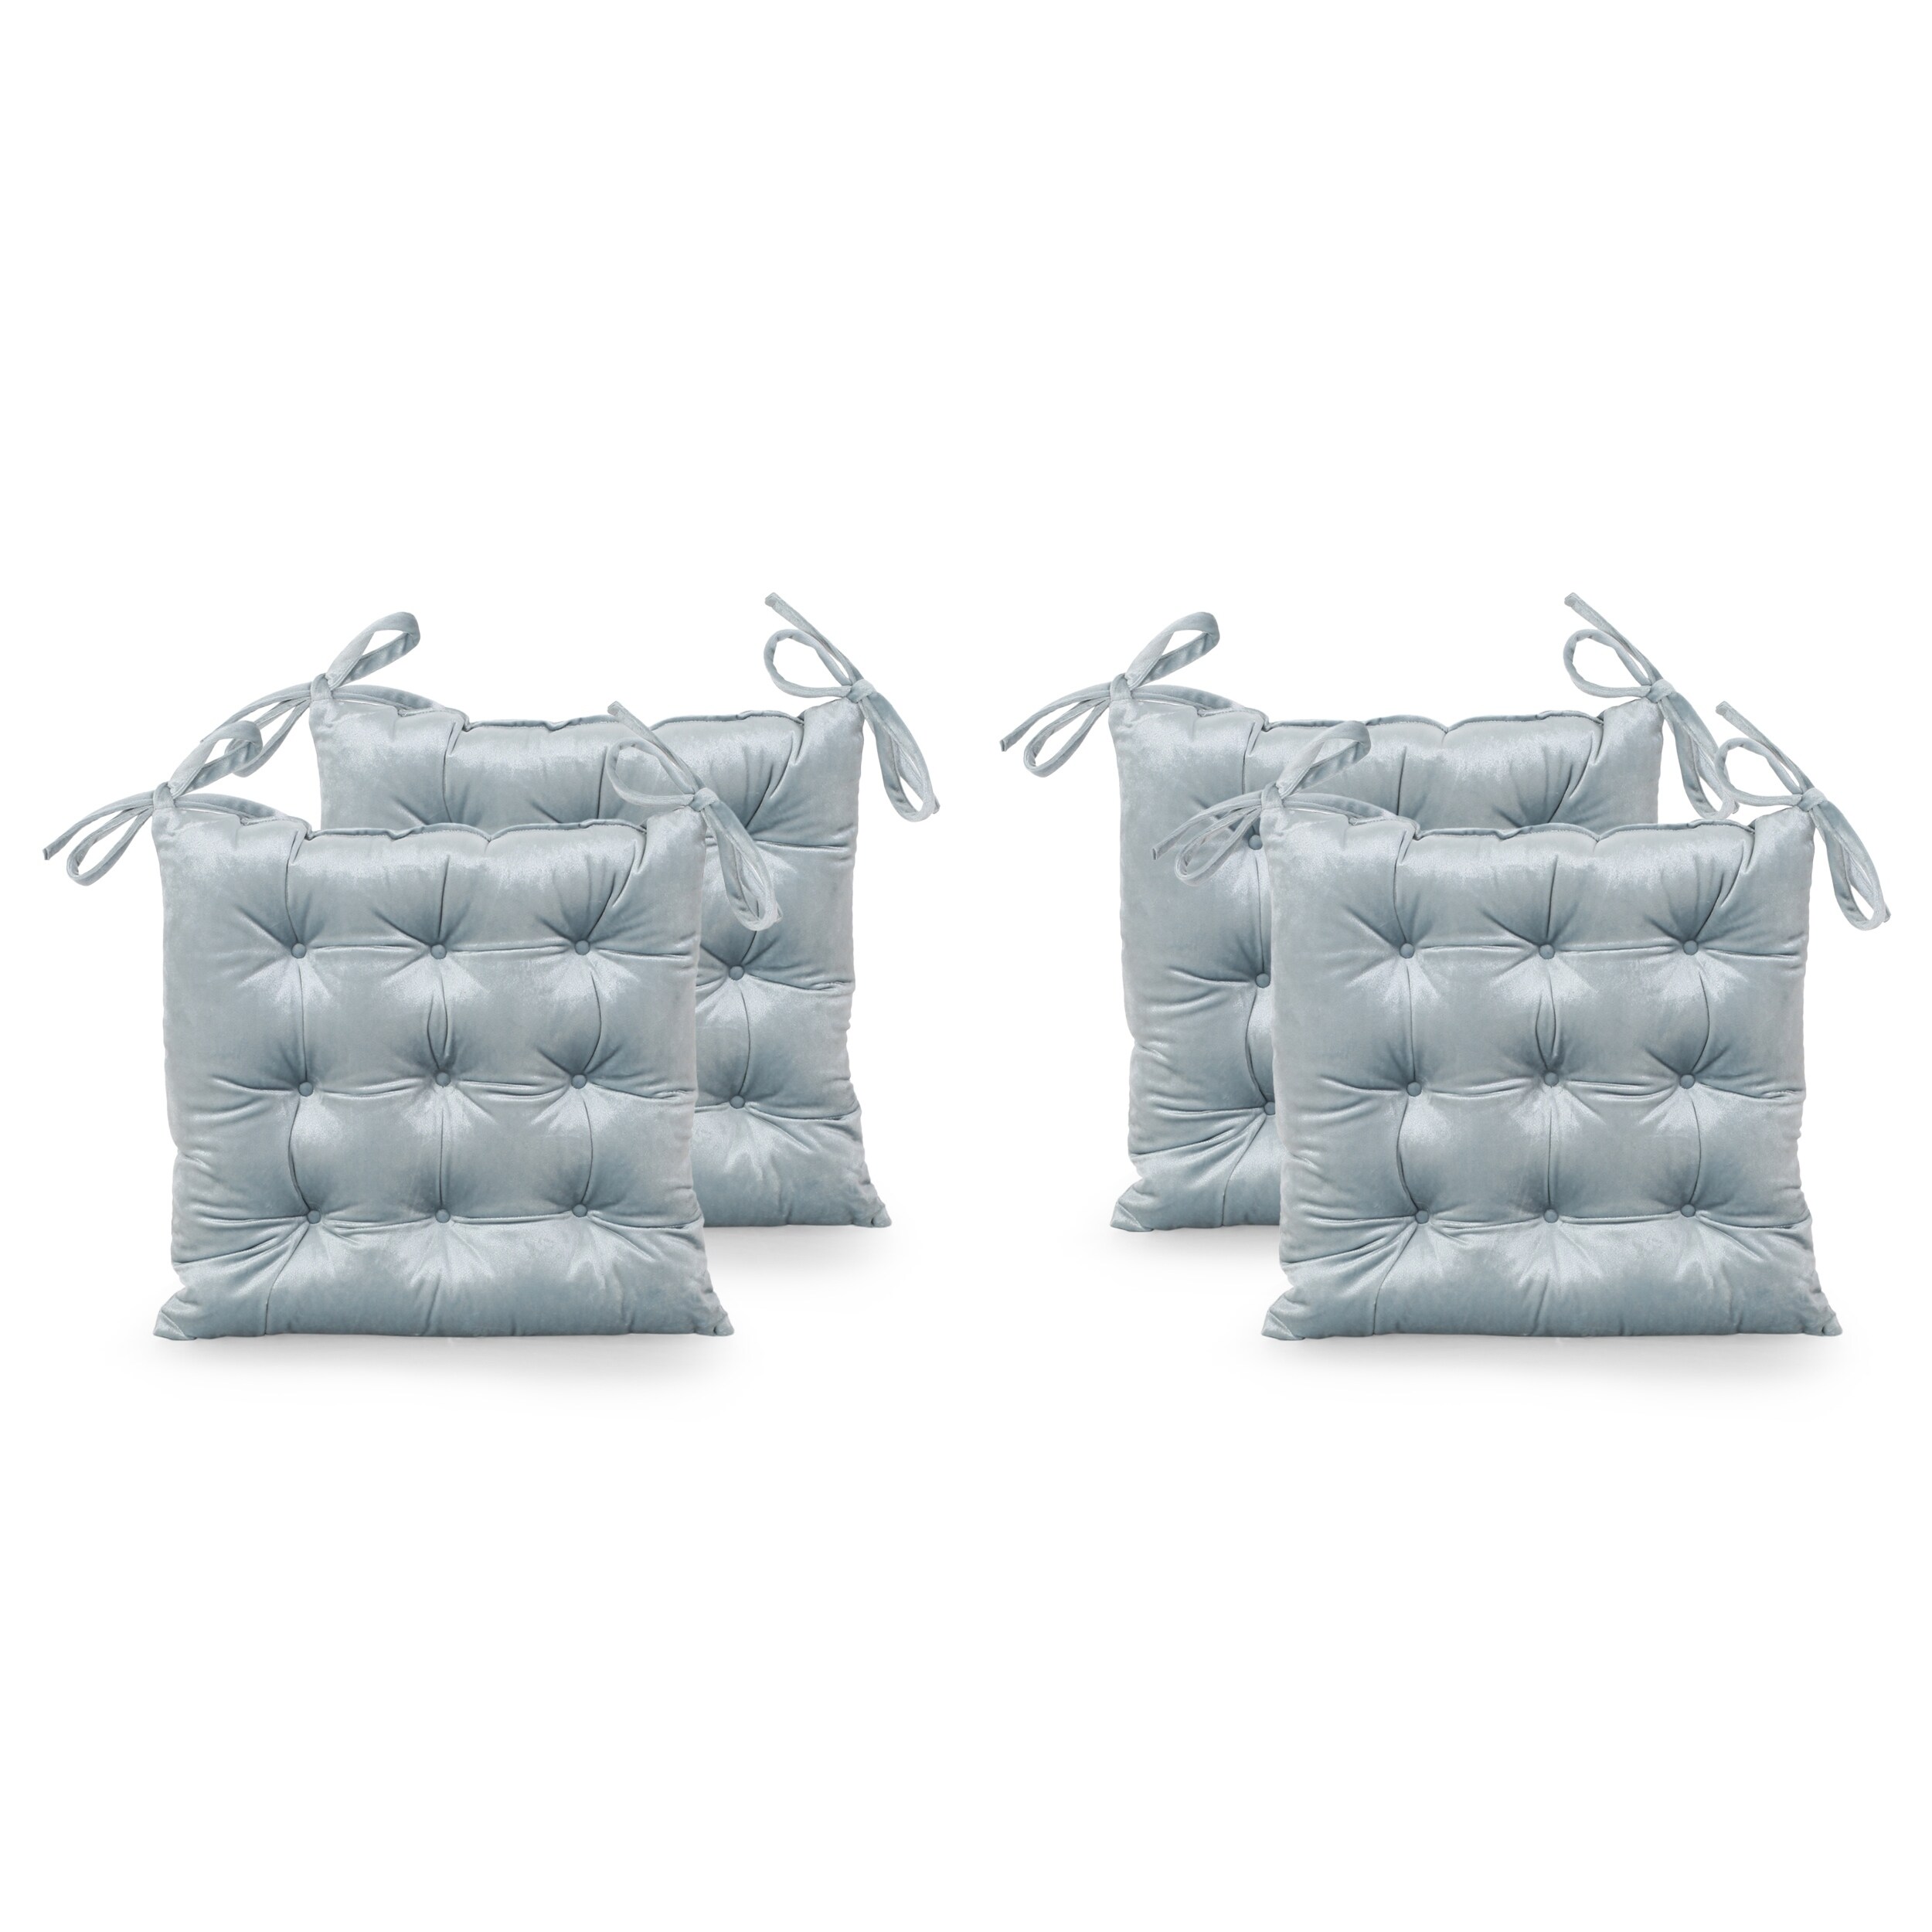 Foxhall Tufted Velvet Dining Chair Cushions (Set of 2) by